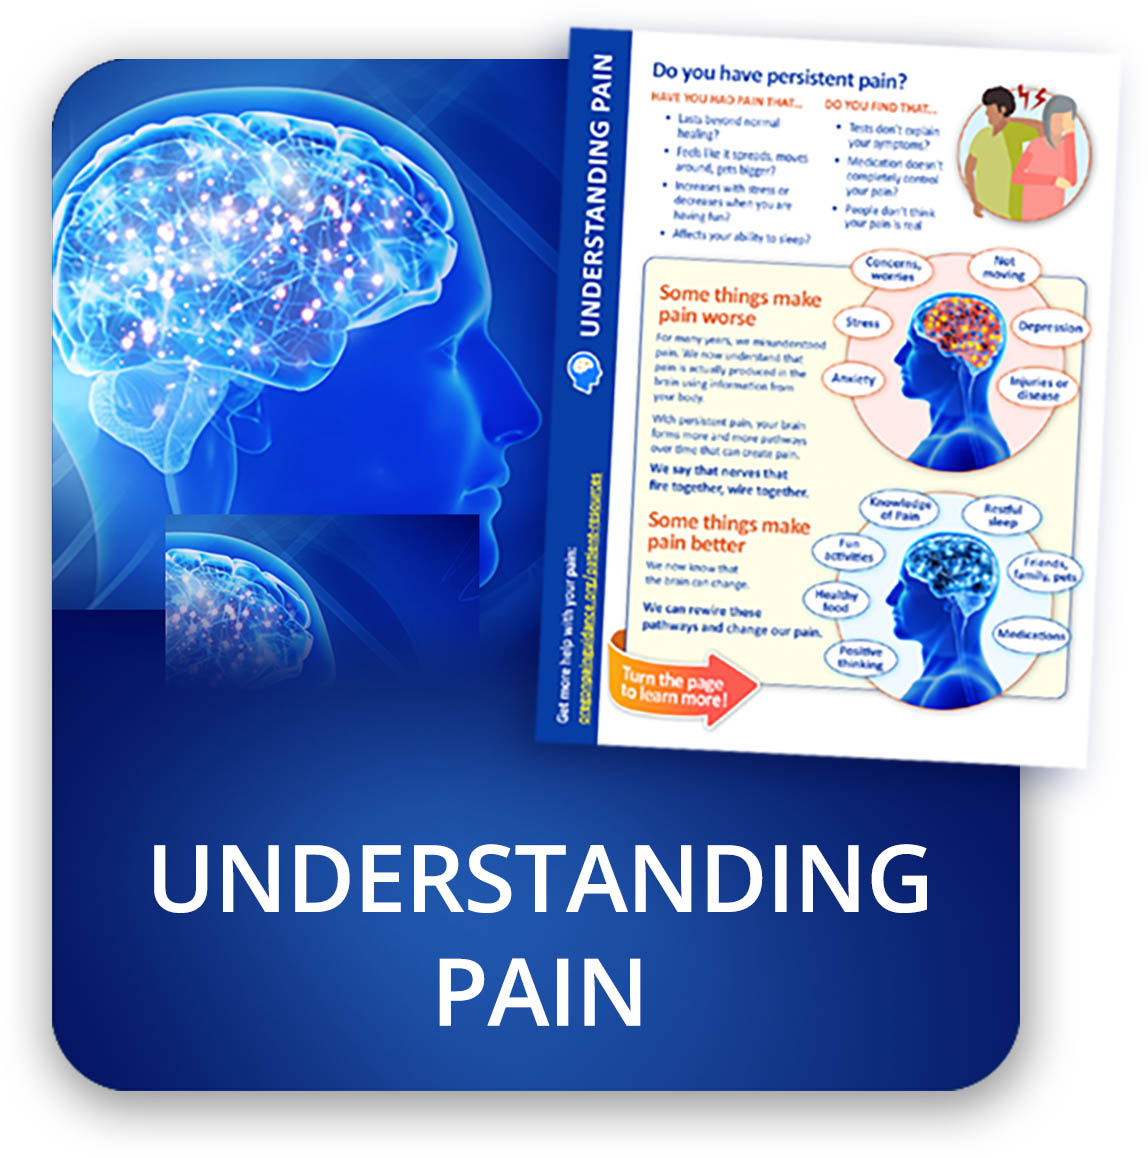 Understand what pain is and how to ease pain